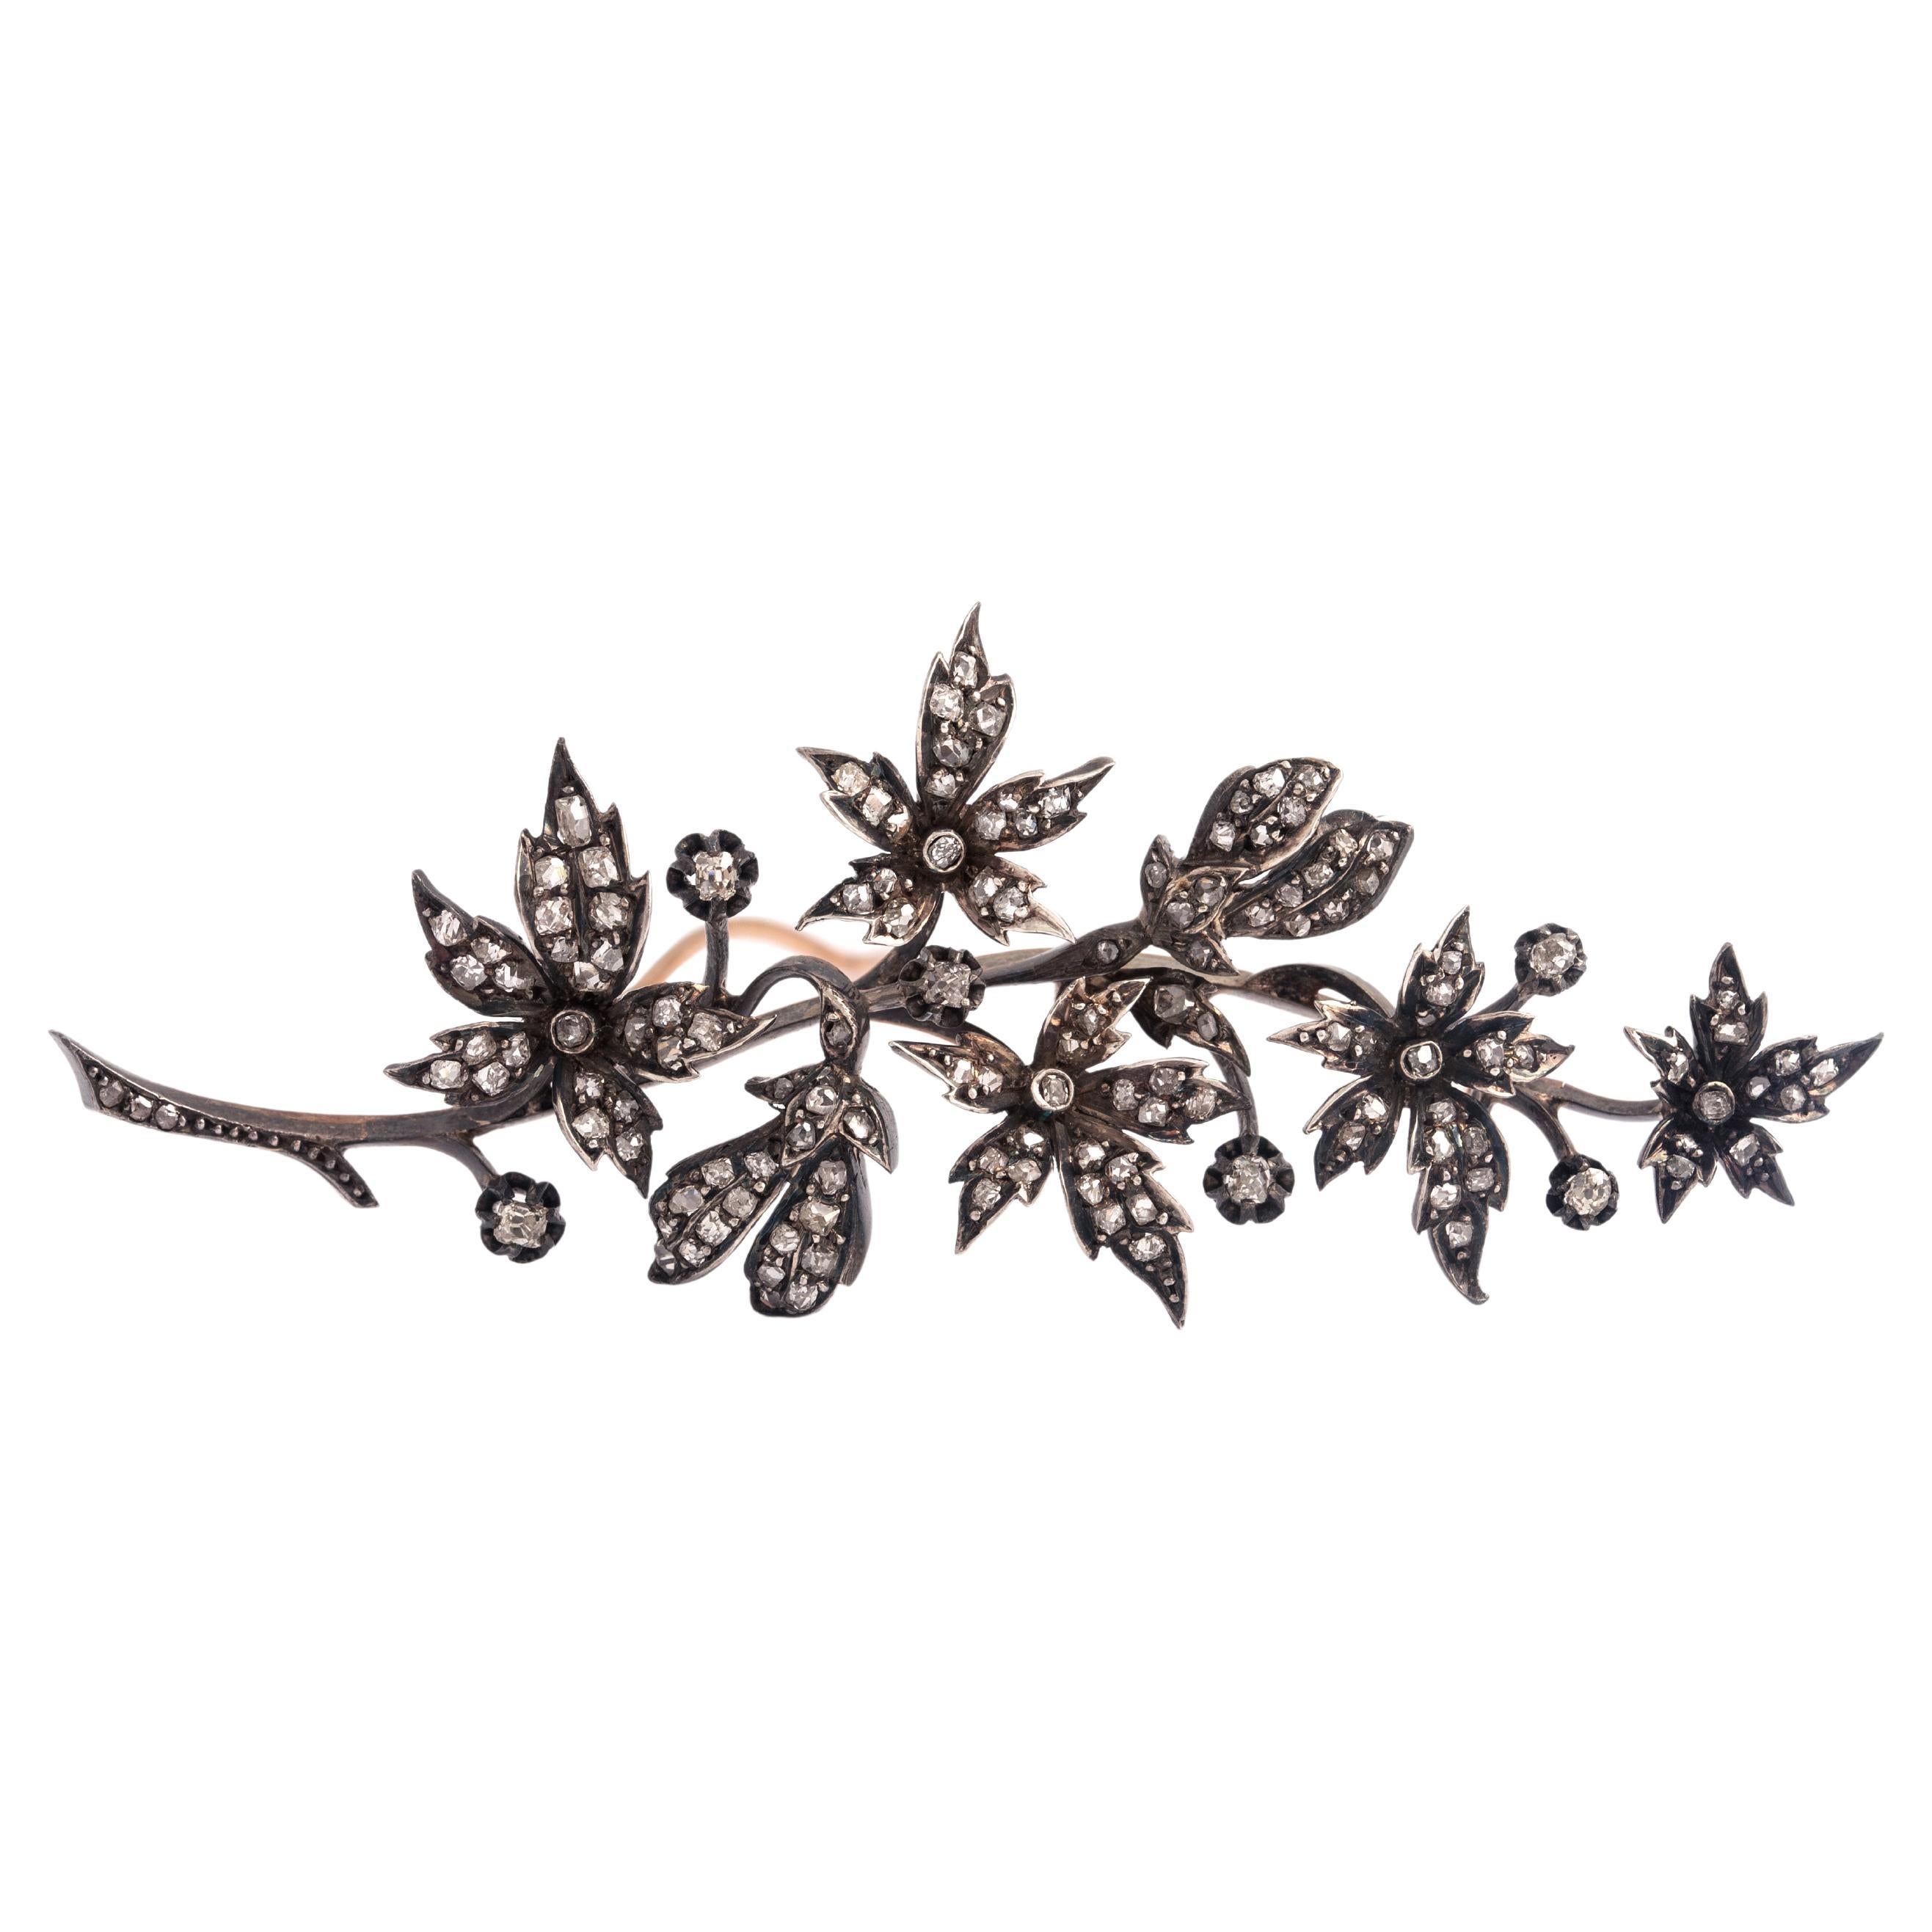 Antique Diamond Silver Gold Flower Brooch.
Late 19th Century. French marks.

Original antique box Mellerio Borgnis Paris - France.

Dimensions:
Length: 9.50 centimeters.
Height: 3.90 centimeters.
Thickness: 1.50 centimeters.

Weight: 22.51 grams.